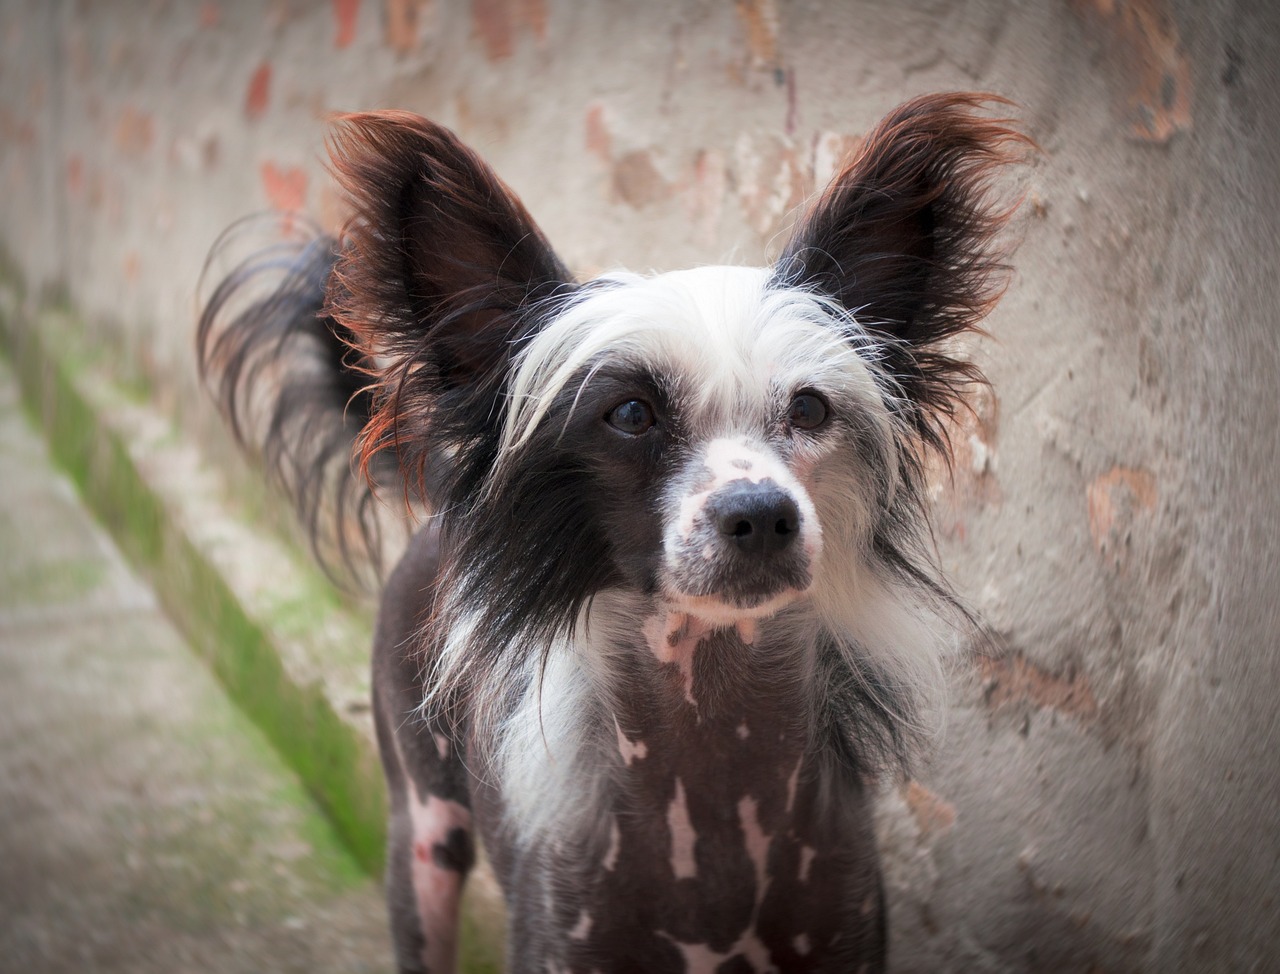 10 Hilarious Things Only a Chinese Crested Owner Would Understand